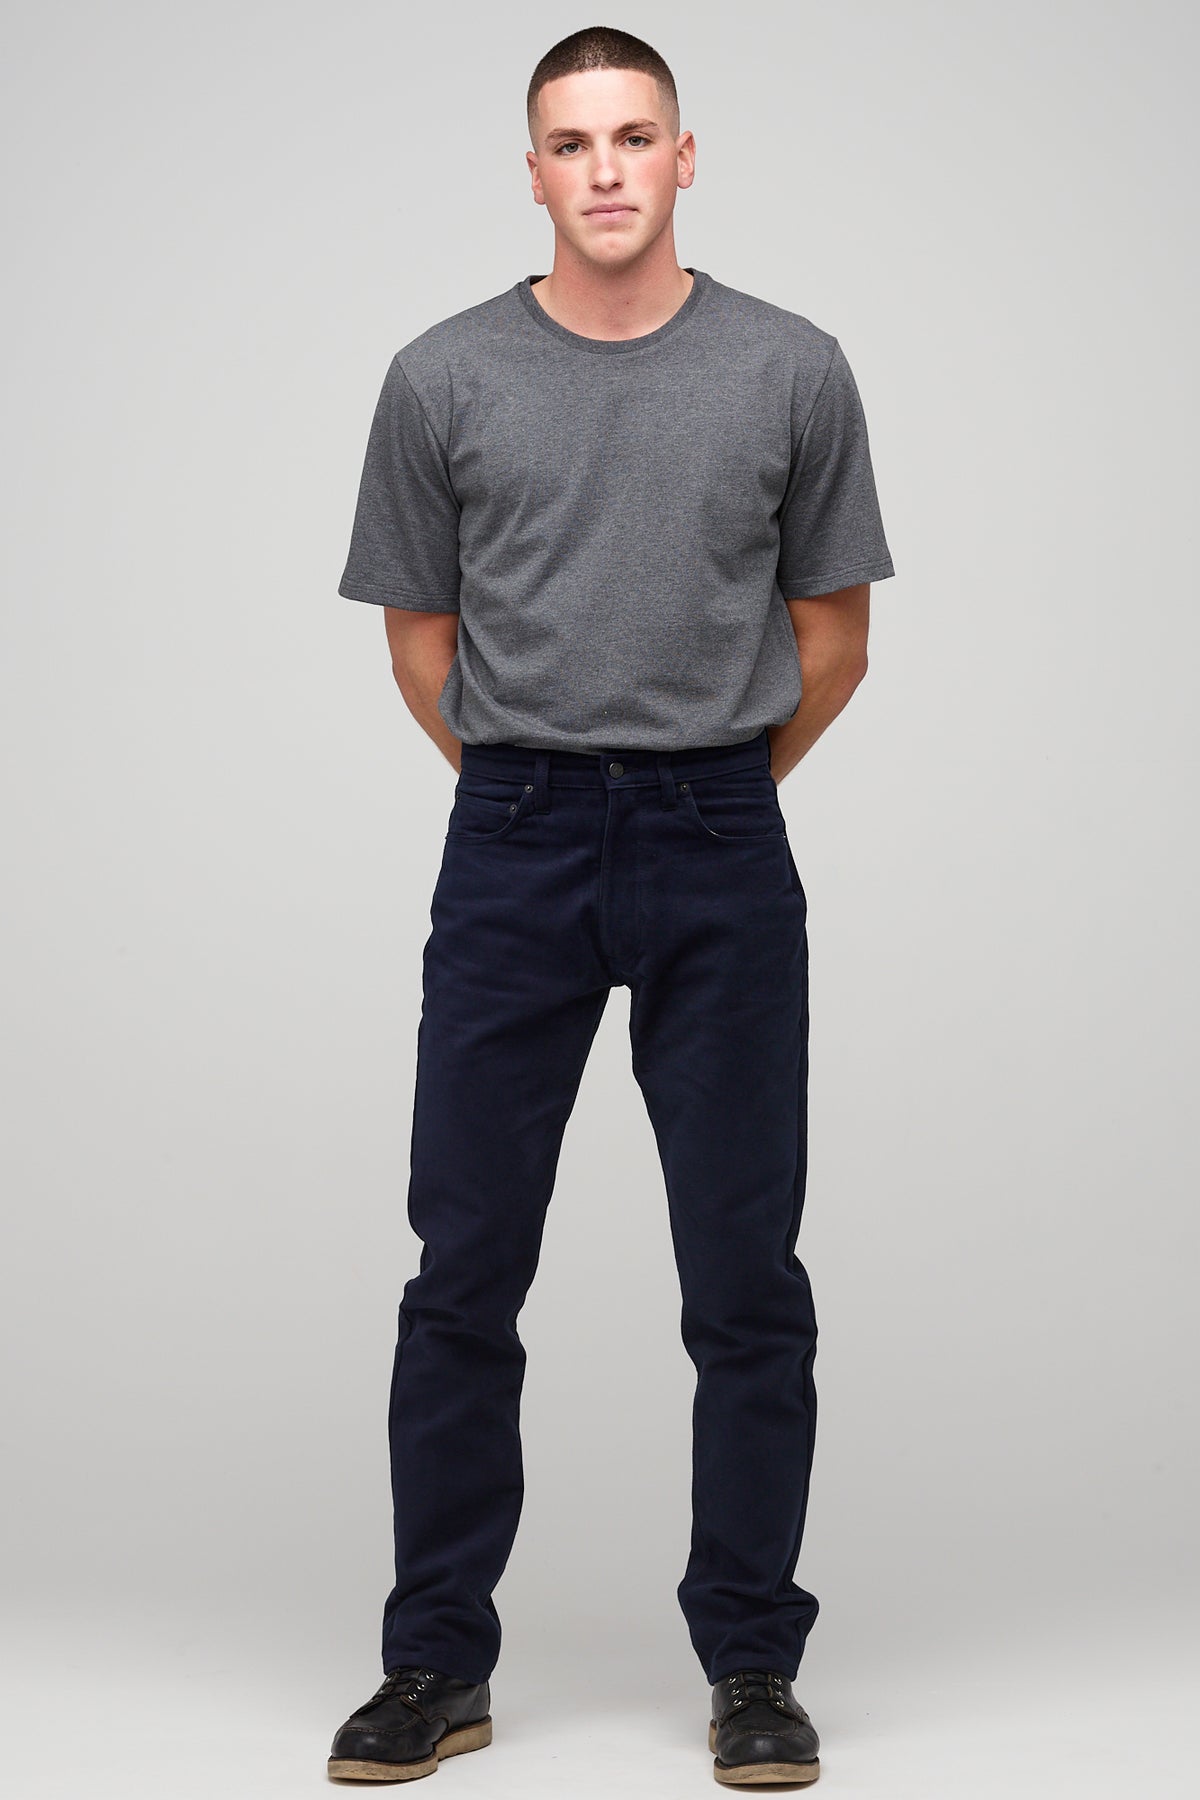 
            Brunette male in navy Five Pocket Moleskin Jean styled with charcoal short sleeve t-shirt